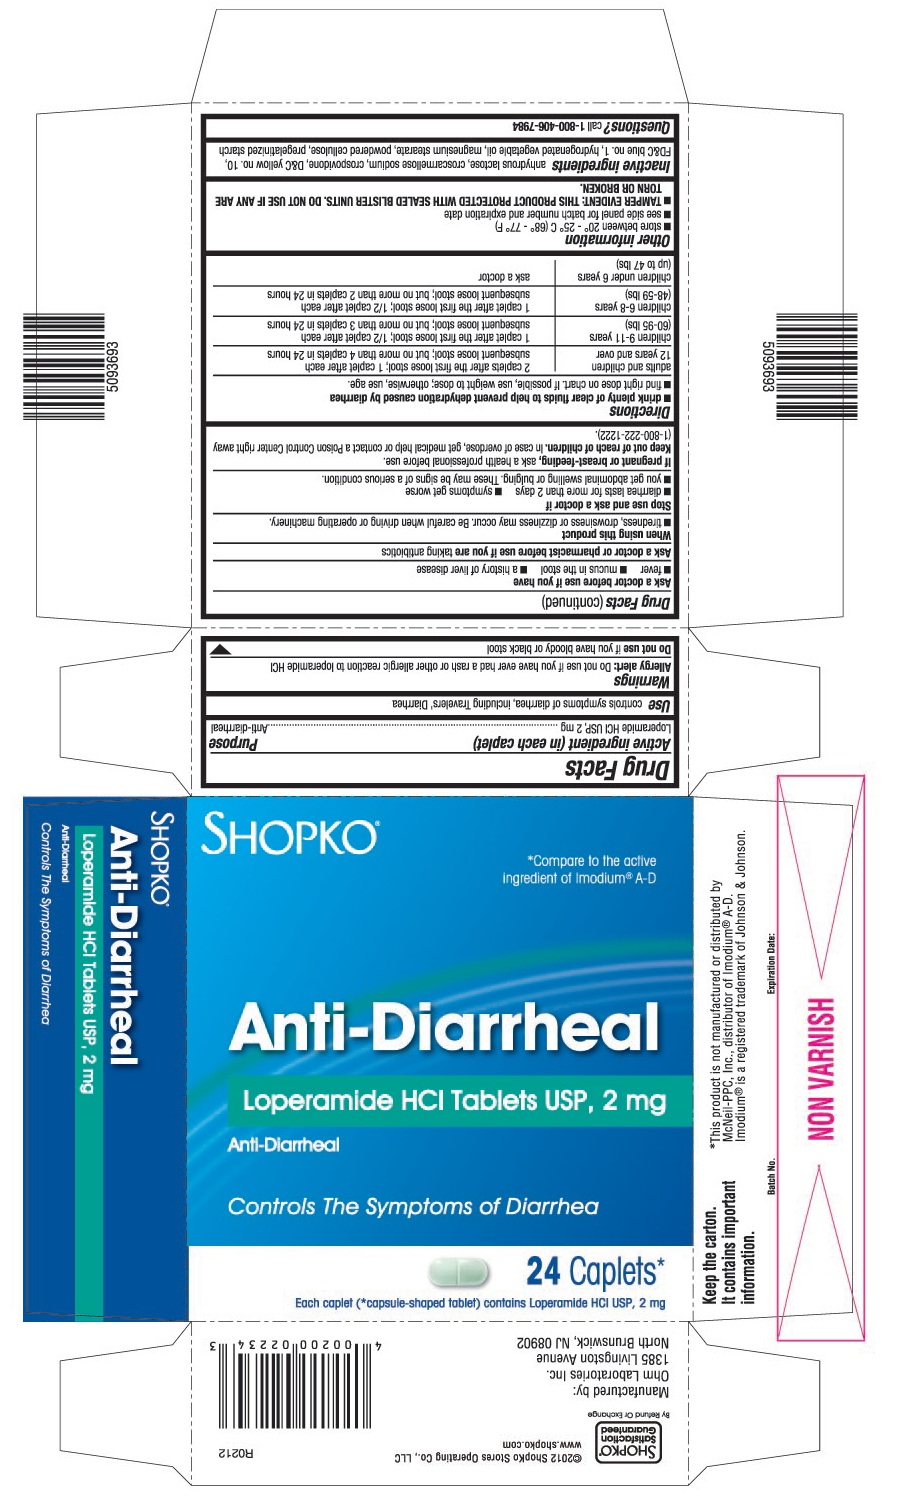 This is the 24 count blister carton label for Shopko Loperamide HCl tablets USP, 2 mg.